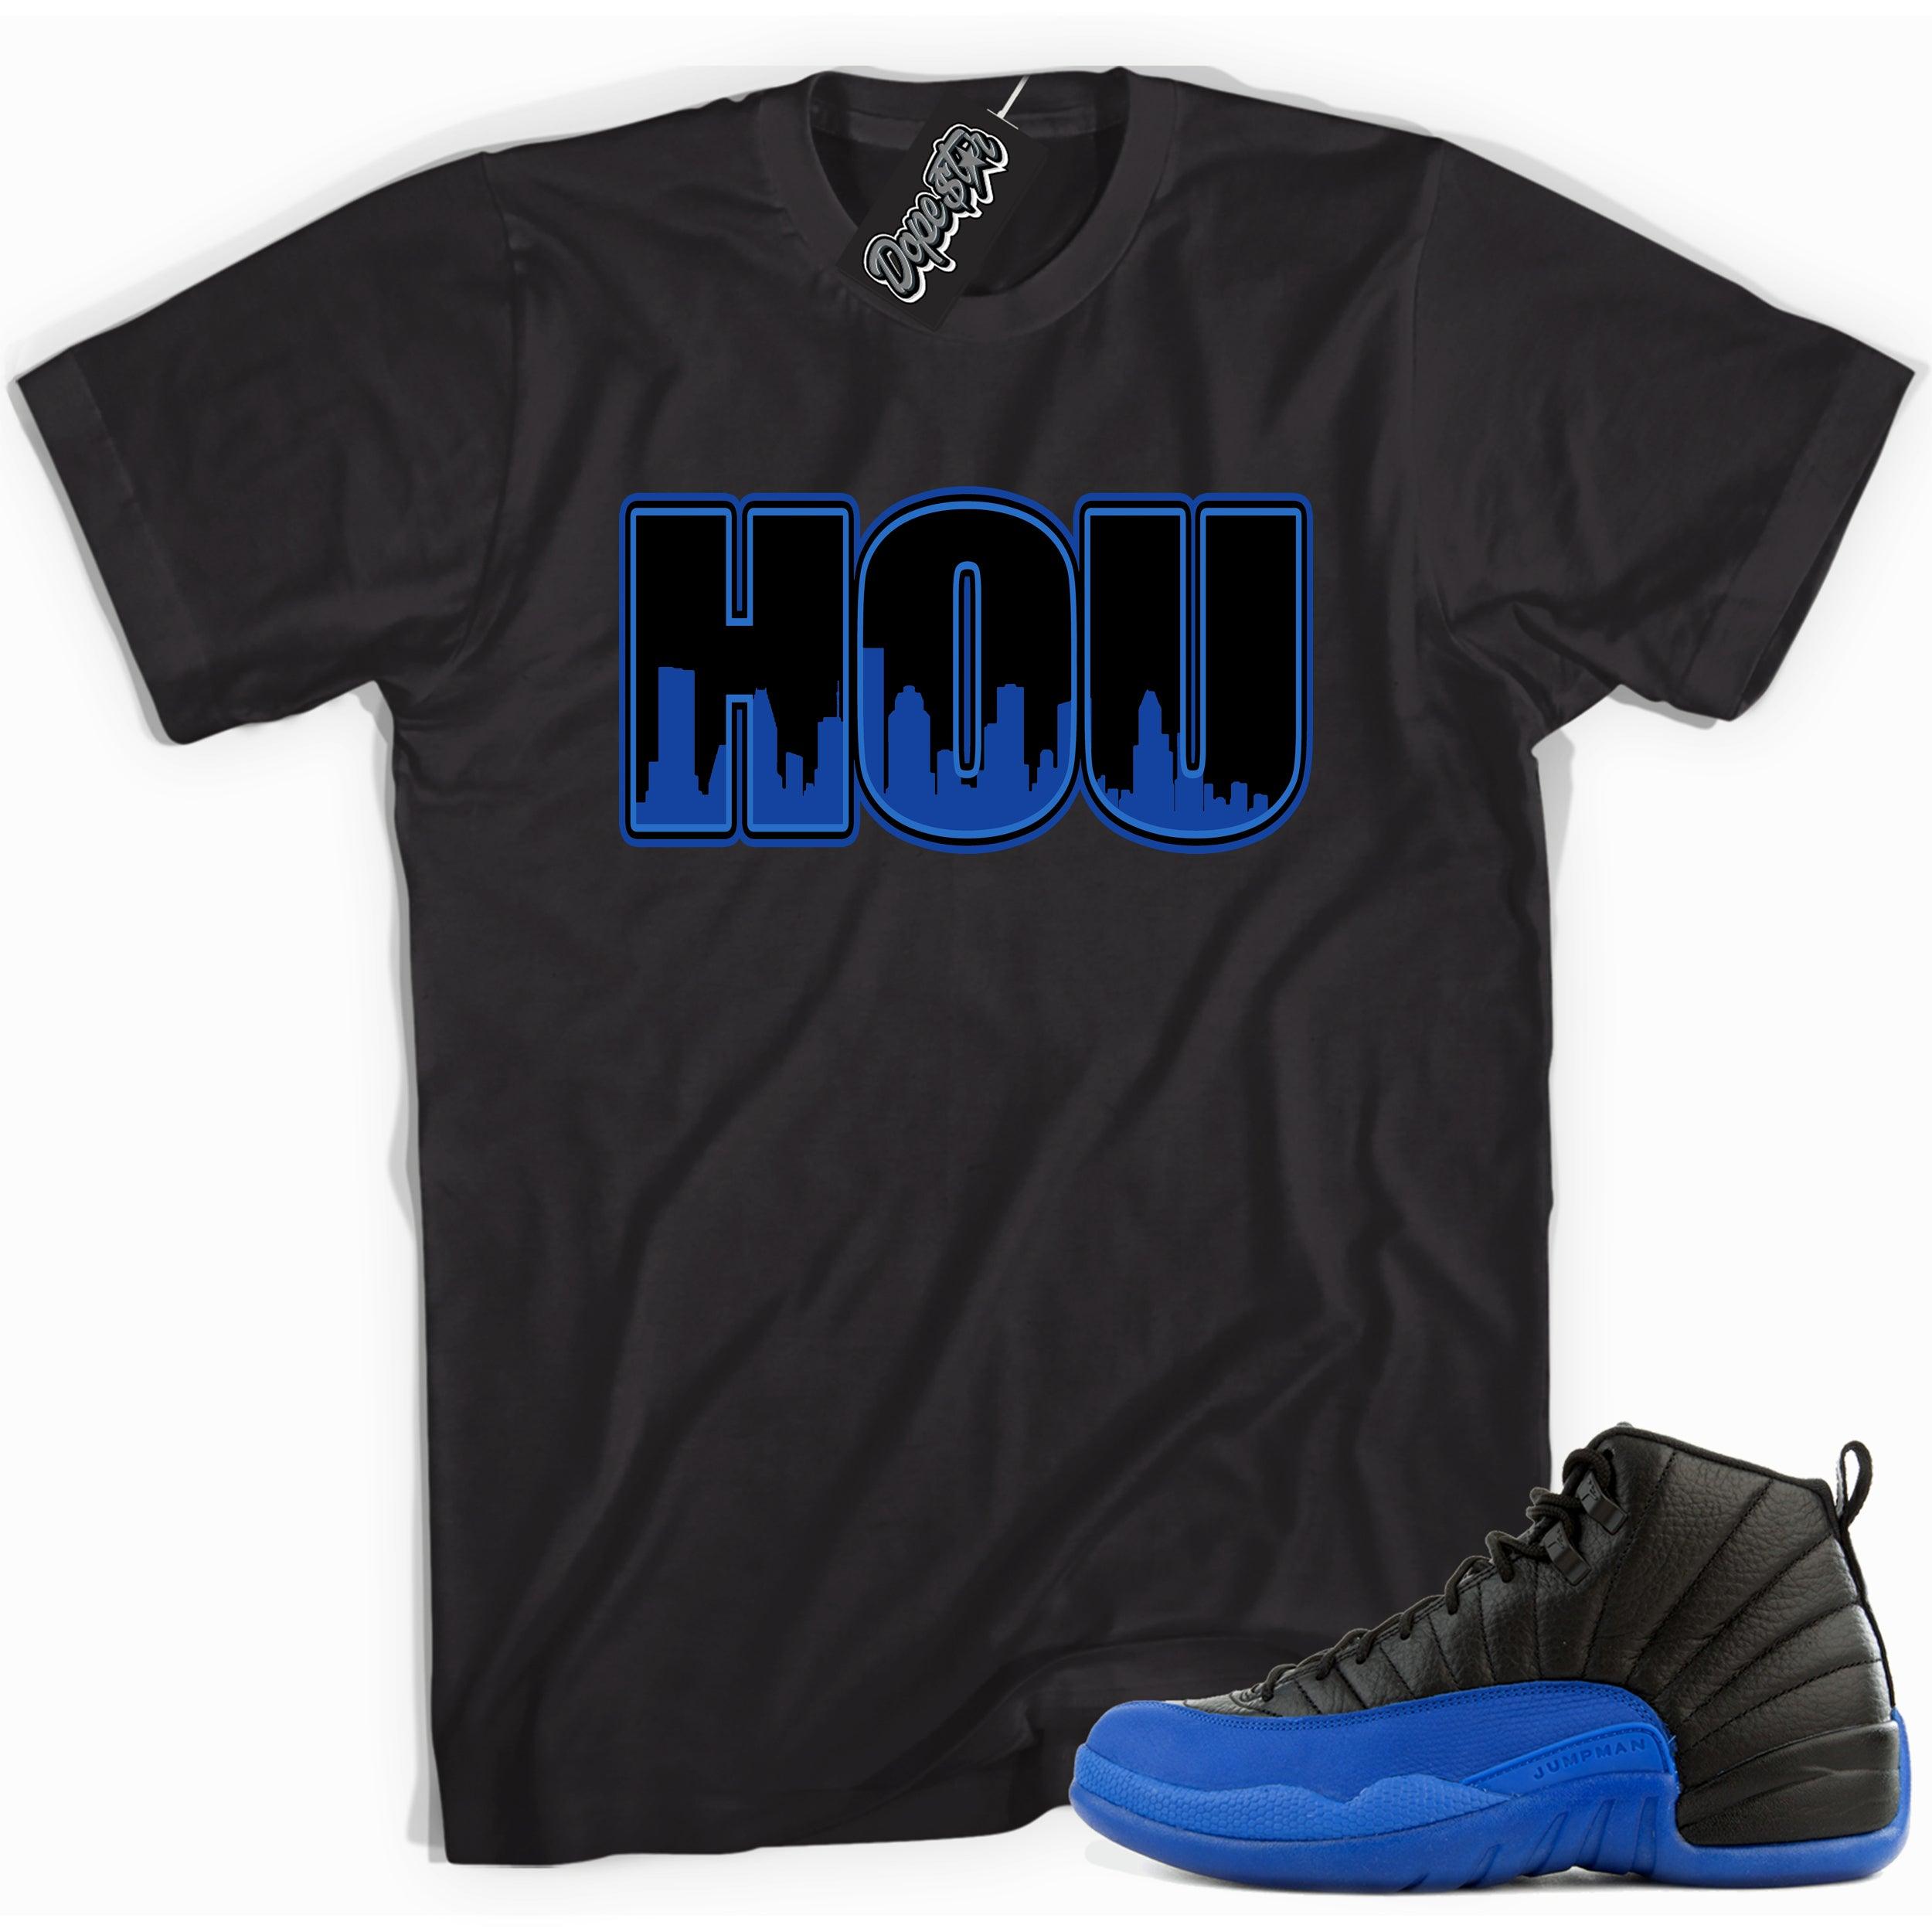 Cool black graphic tee with 'houston' print, that perfectly matches  Air Jordan 12 Retro Black Game Royal sneakers.